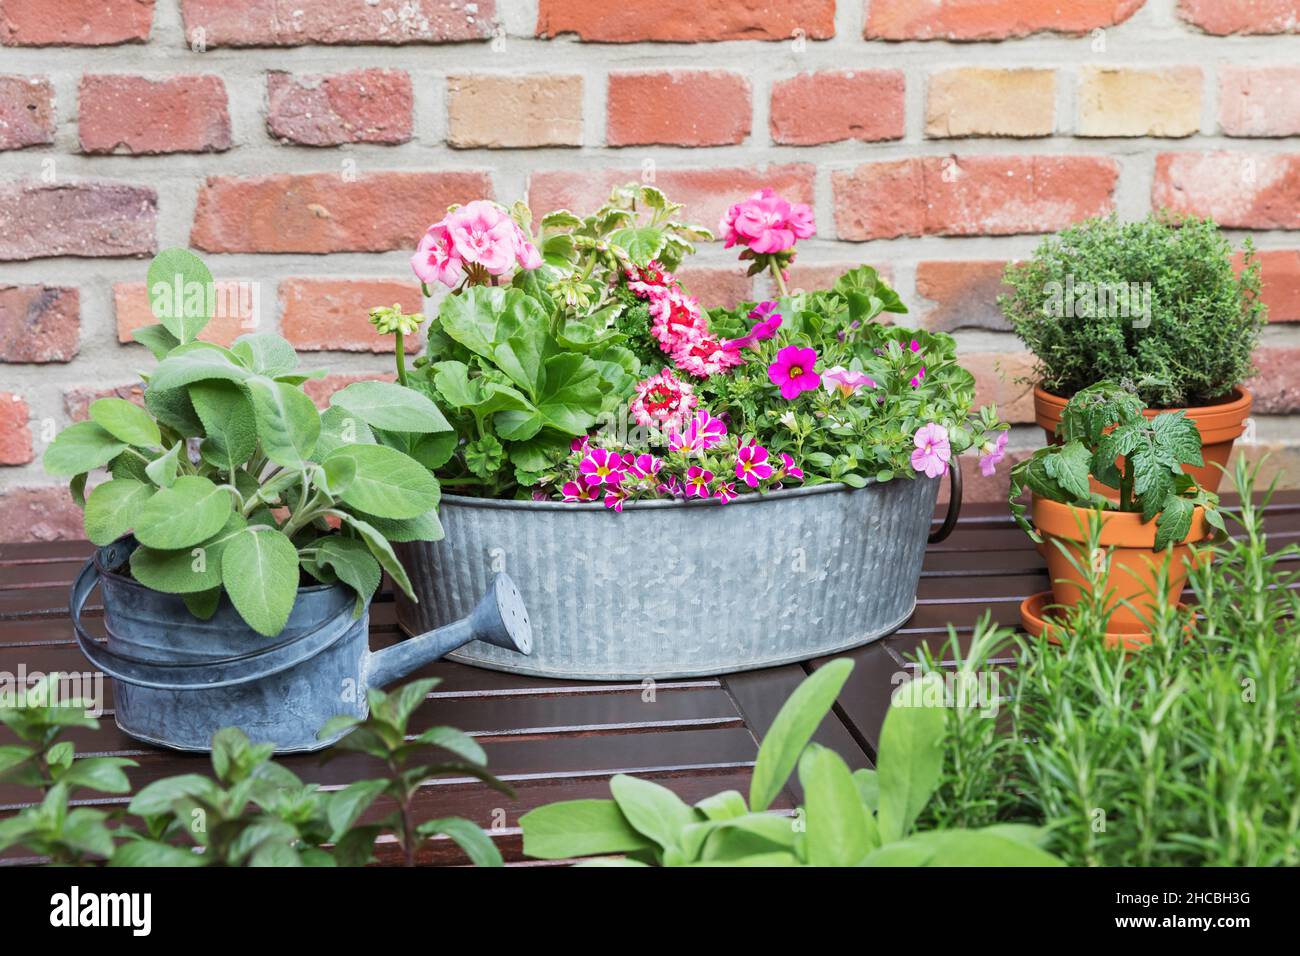 Various herbs and flowers cultivated in balcony garden Stock Photo